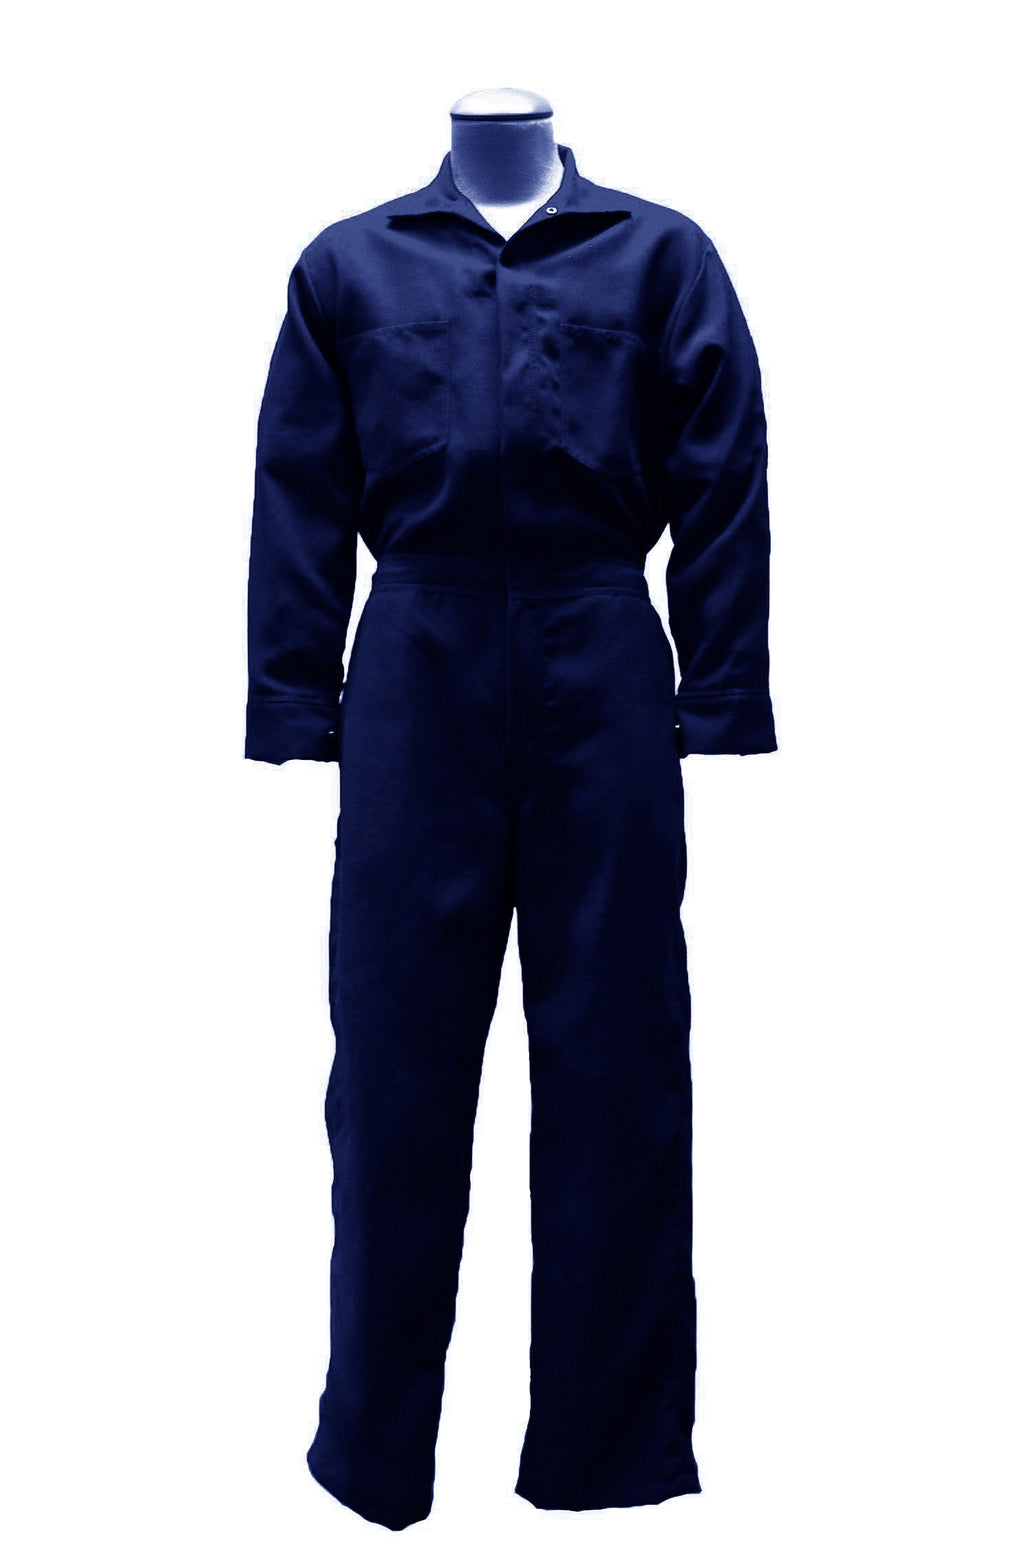 FlameRwear, FR Coverall Ladies, fwCLT1-6, Tecasafe One 5.7 oz, Cat2, Navy